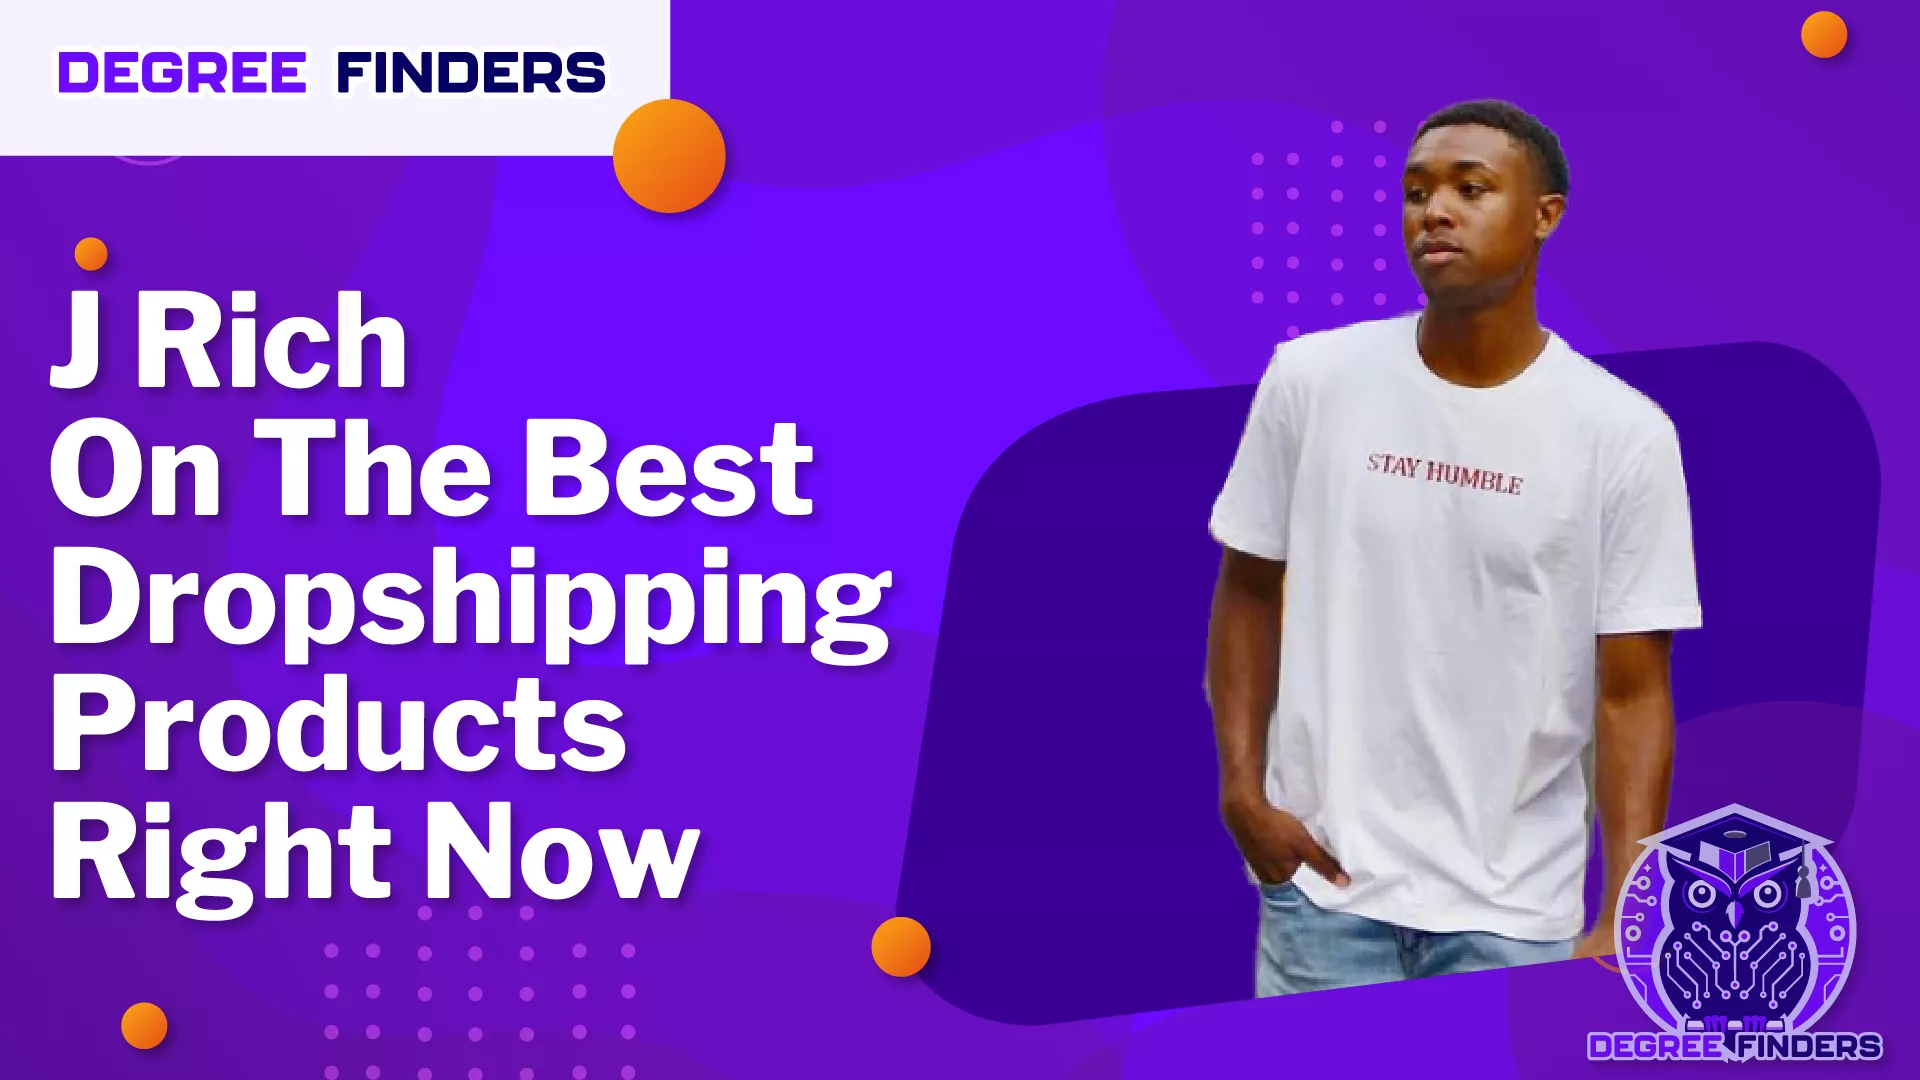 J Rich On The Best Dropshipping Products Right Now